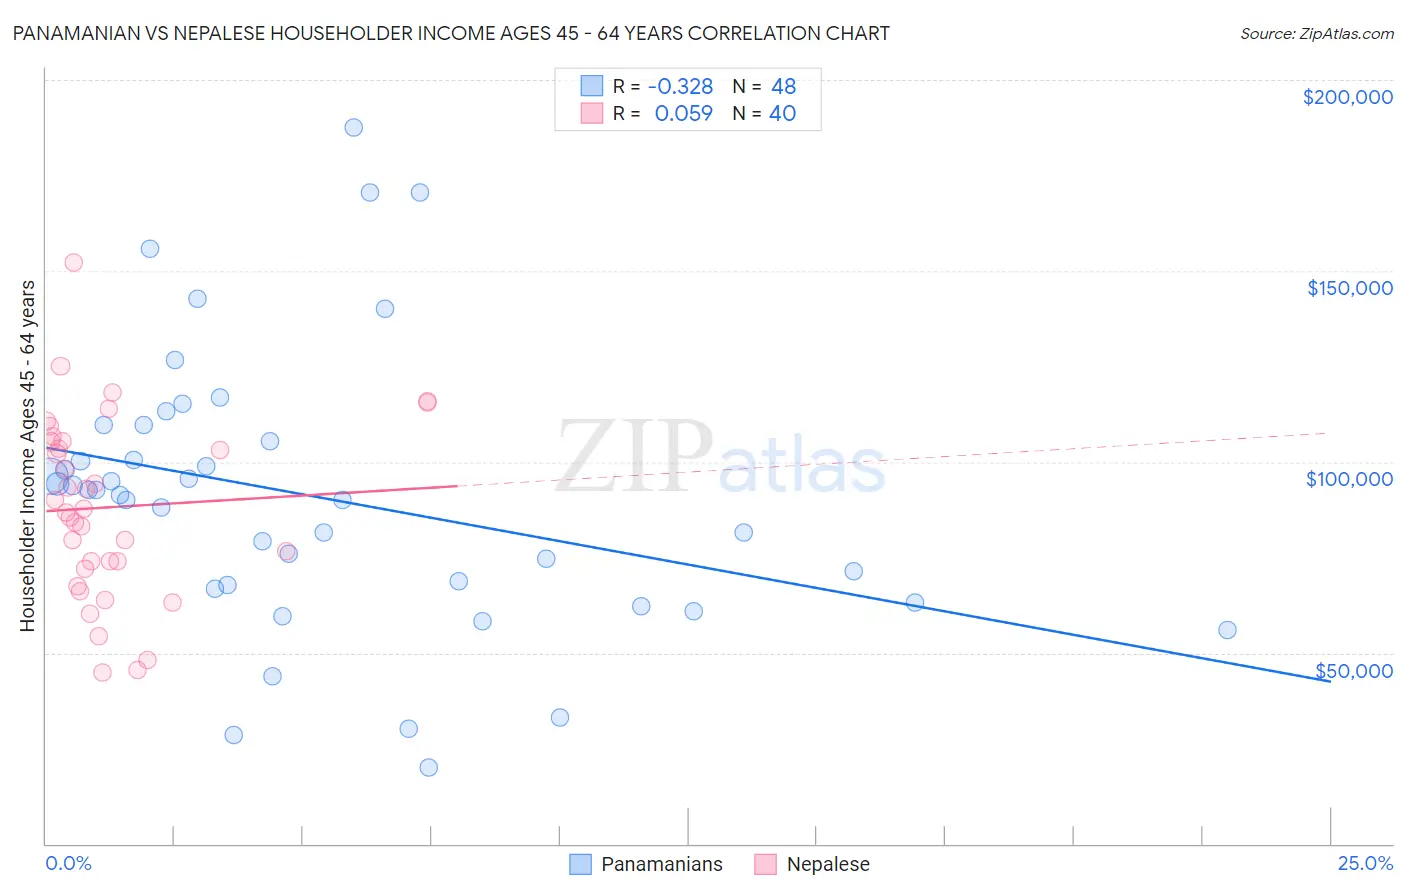 Panamanian vs Nepalese Householder Income Ages 45 - 64 years